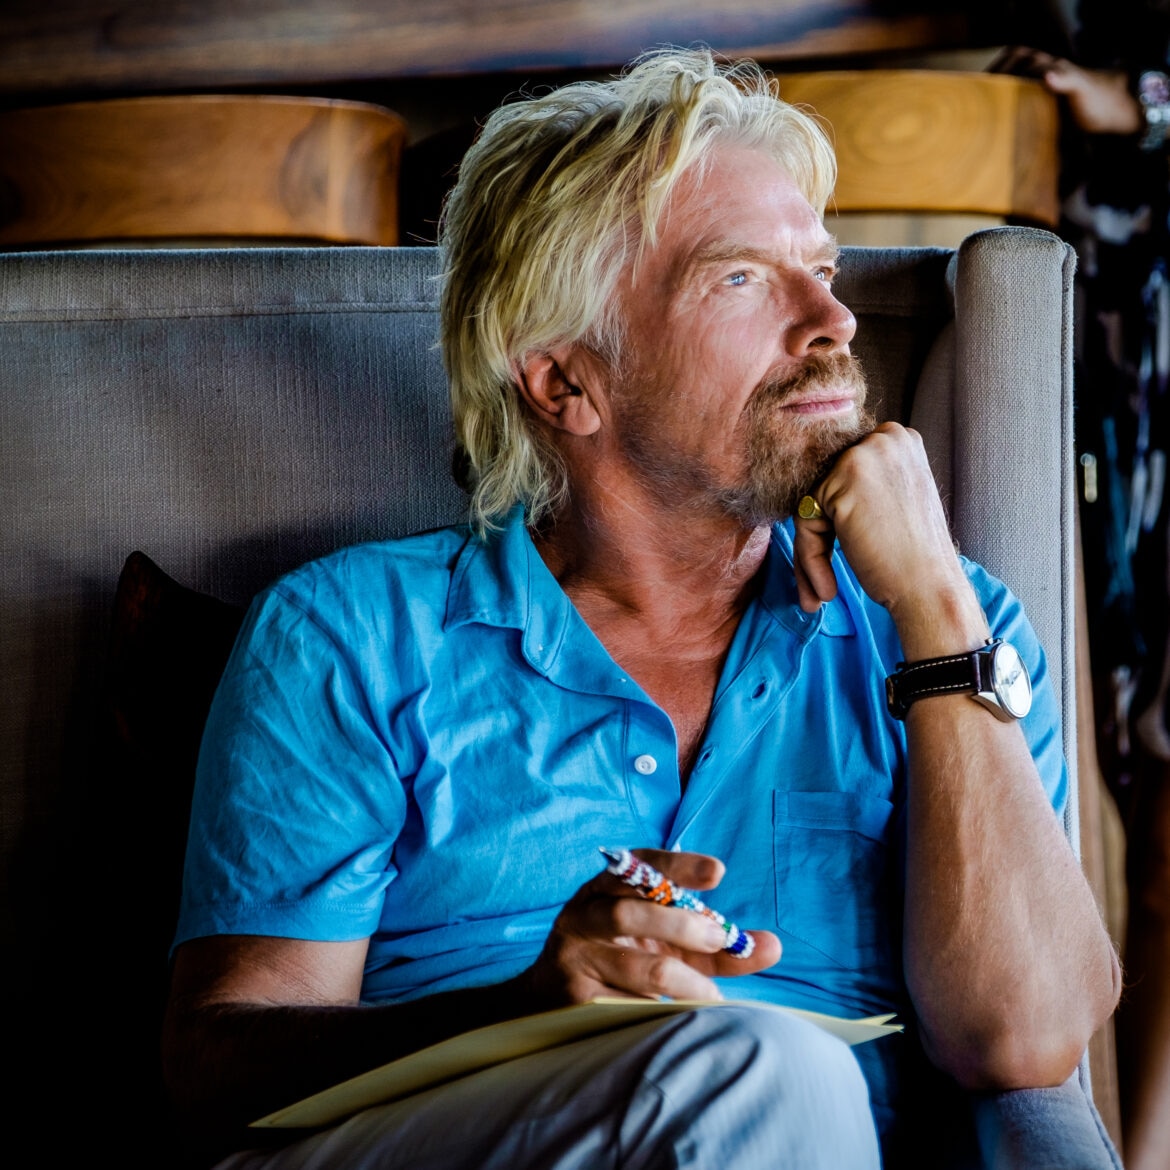 The interview: Sir Richard Branson on the past, present and future - CityAM